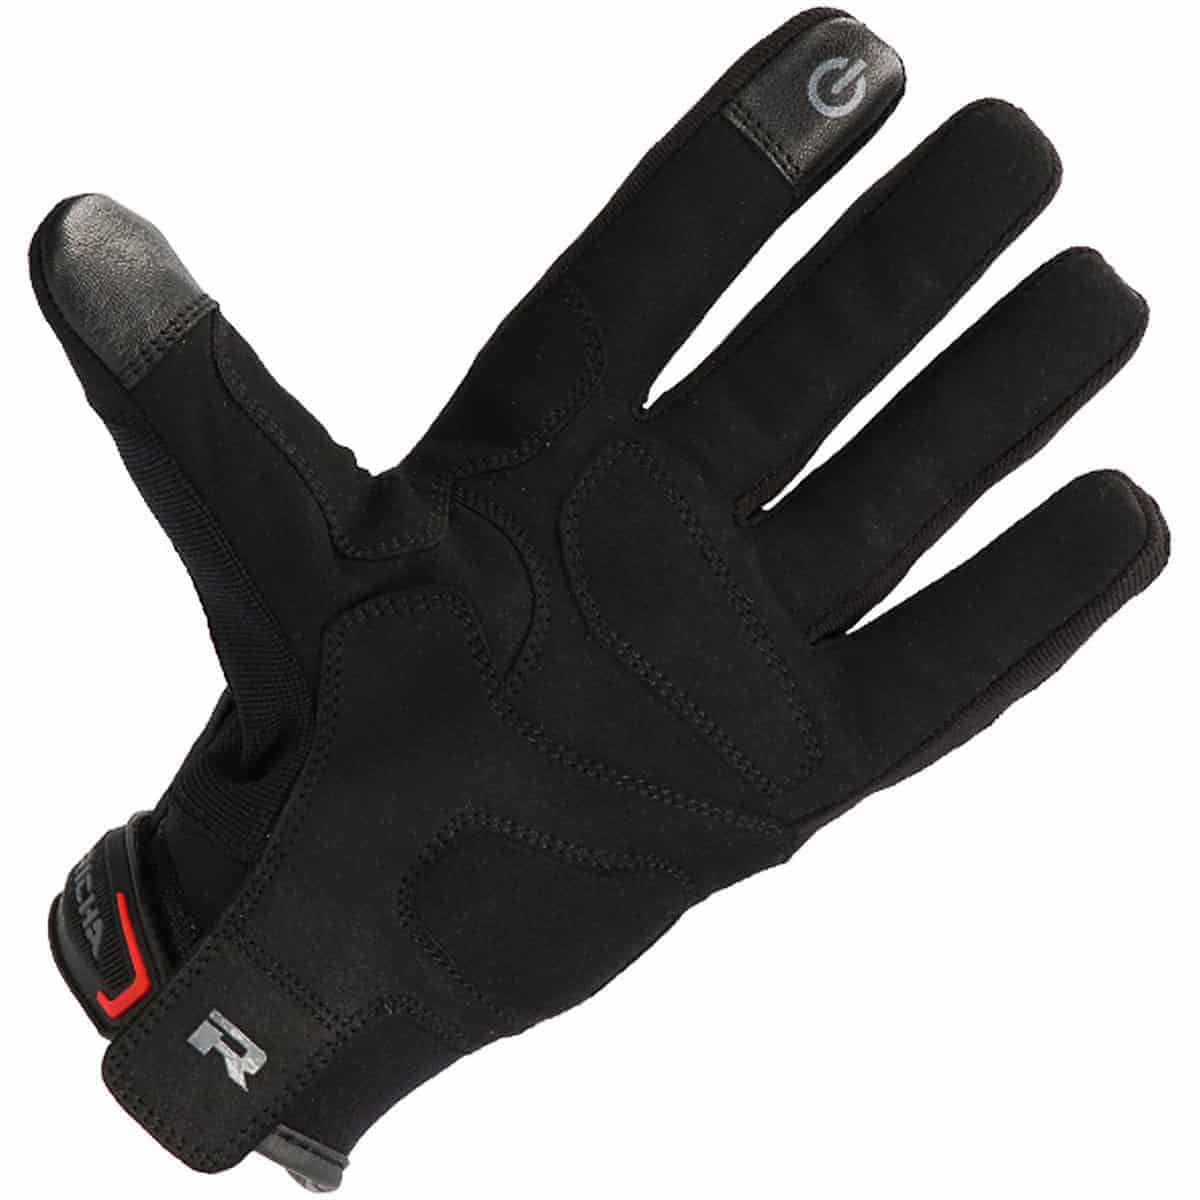 Richa waterproof motorcycle gloves for 'summer in the City' - palm